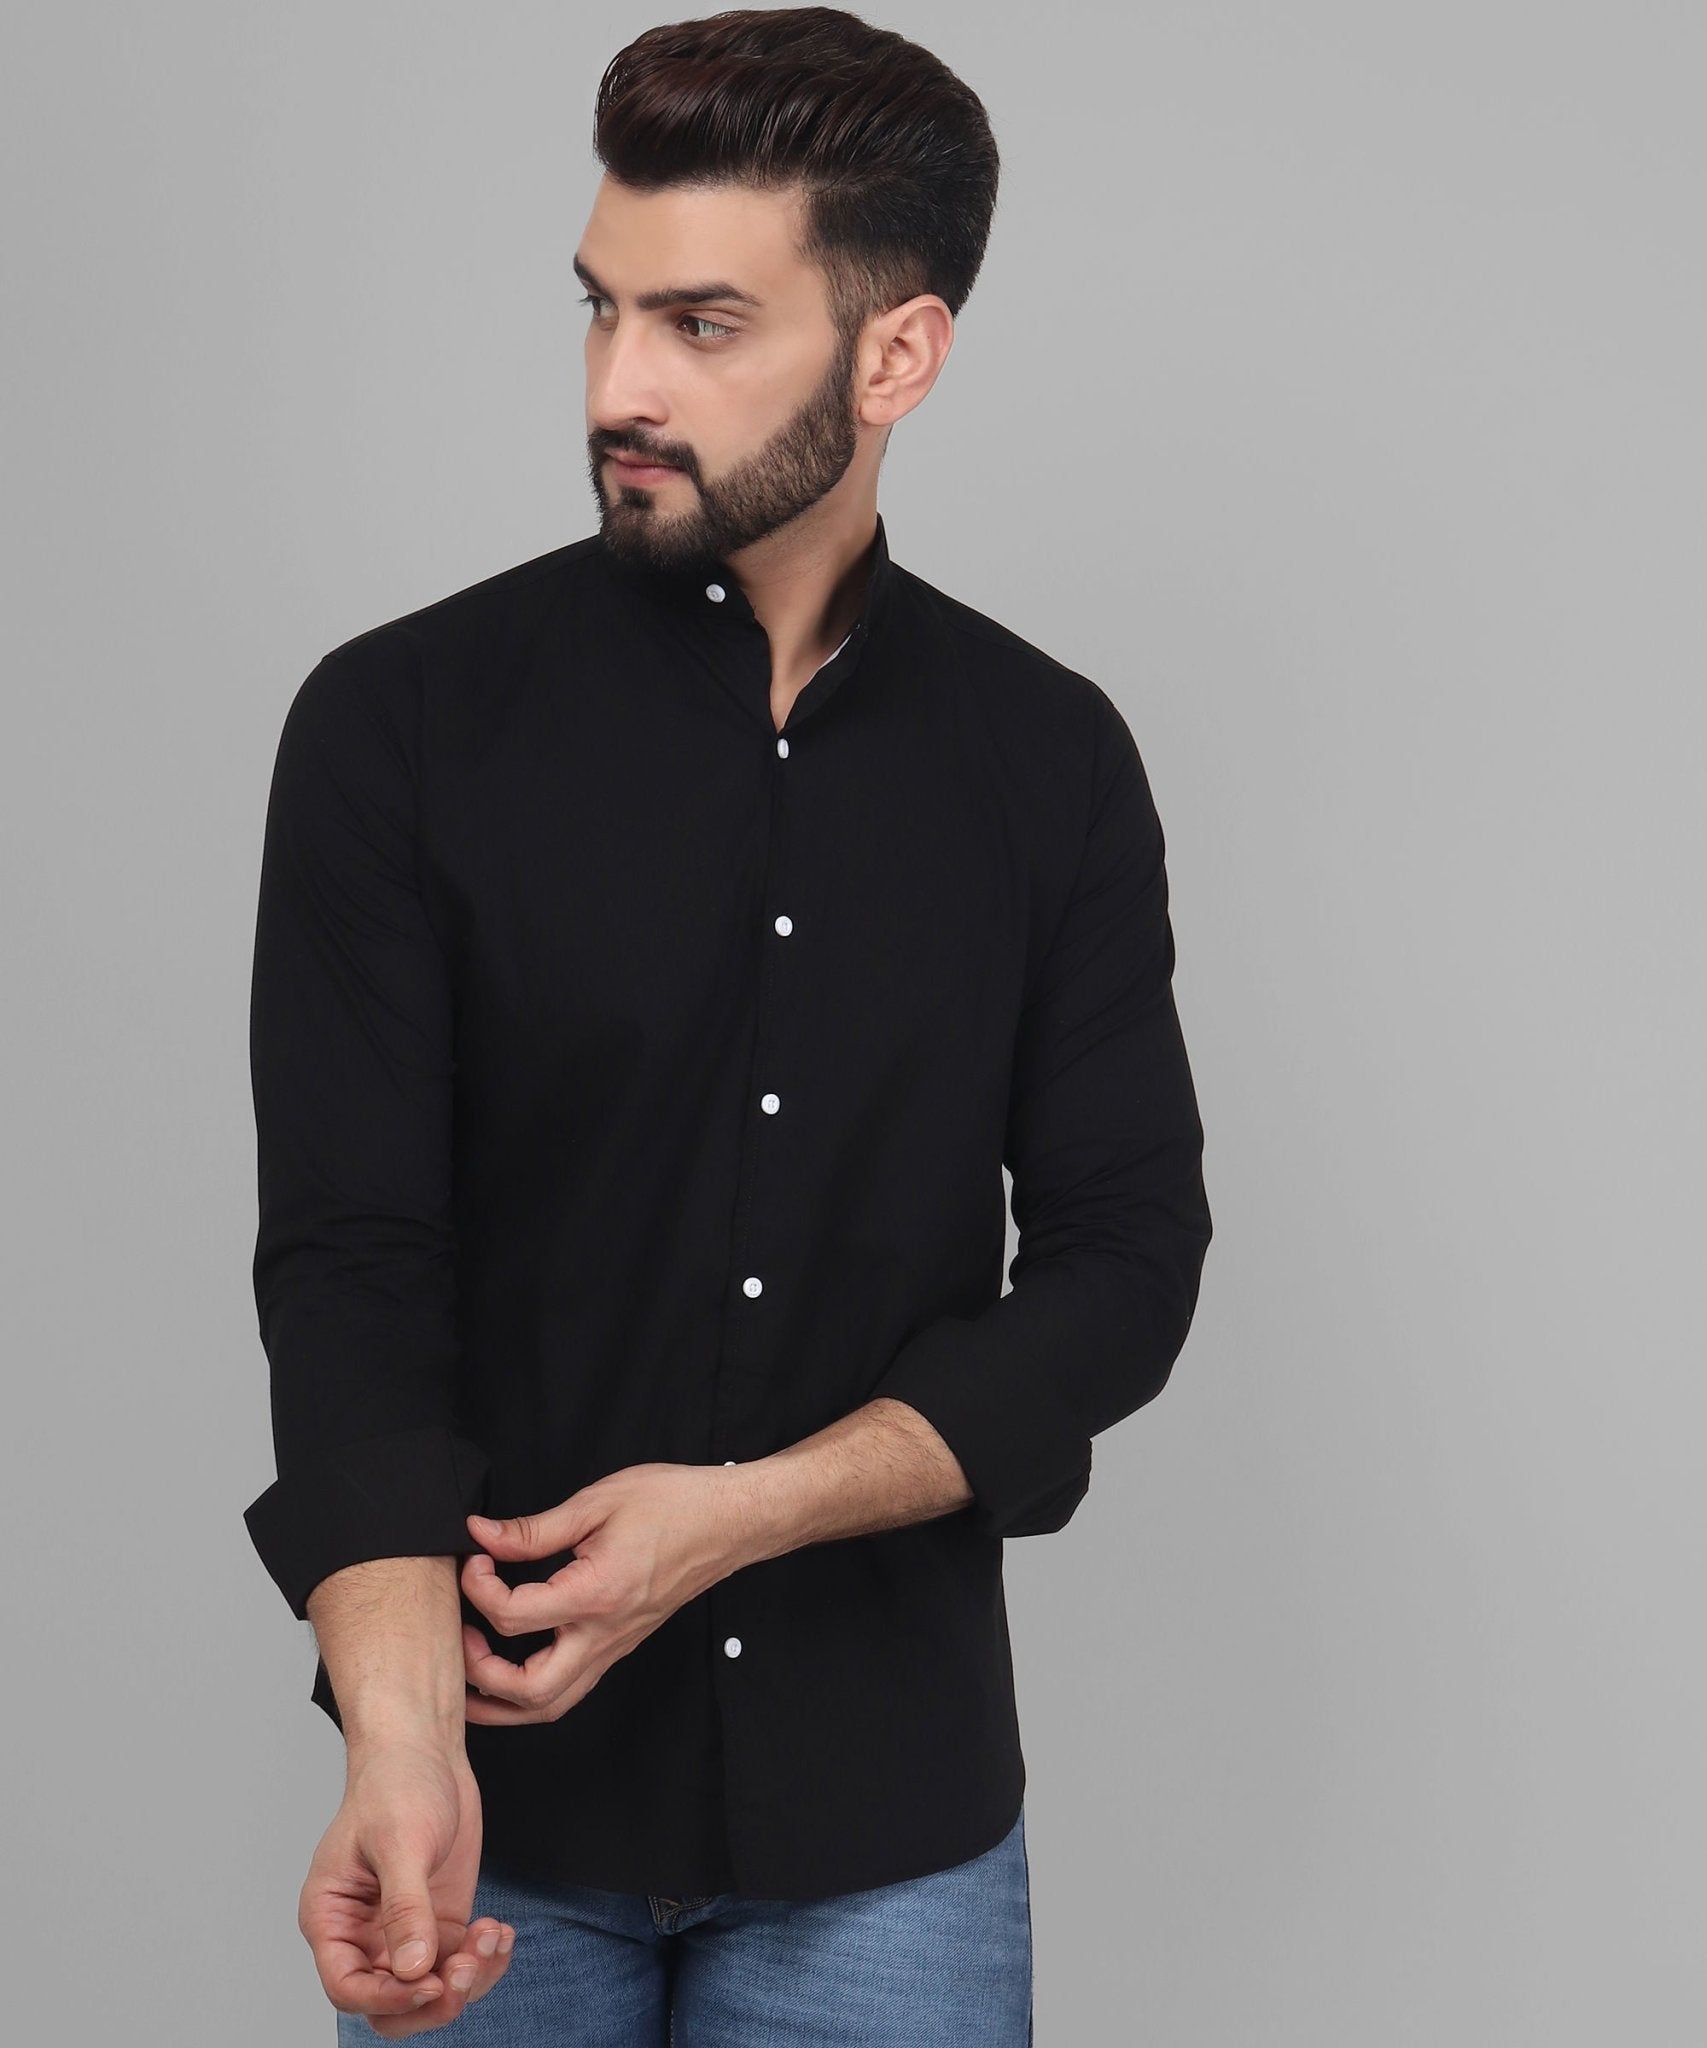 TryBuy Exclusive Men's Black Solid Band Casual Cotton Shirt - TryBuy® USA🇺🇸